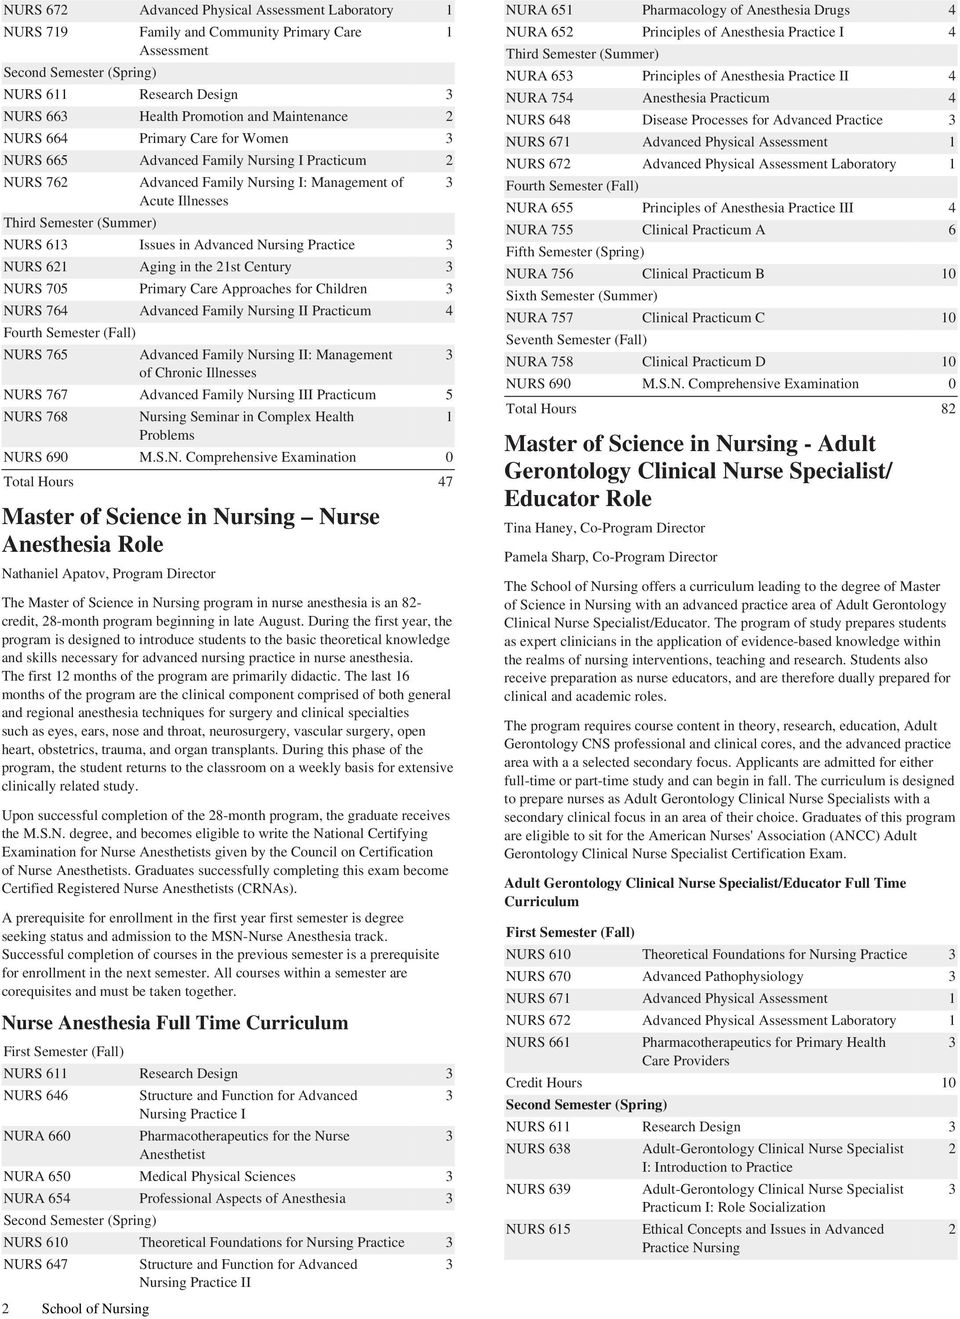 Approaches for Children NURS 76 Advanced Family Nursing II Practicum NURS 765 Advanced Family Nursing II: of Chronic Illnesses NURS 767 Advanced Family Nursing III Practicum 5 NURS 768 Nursing